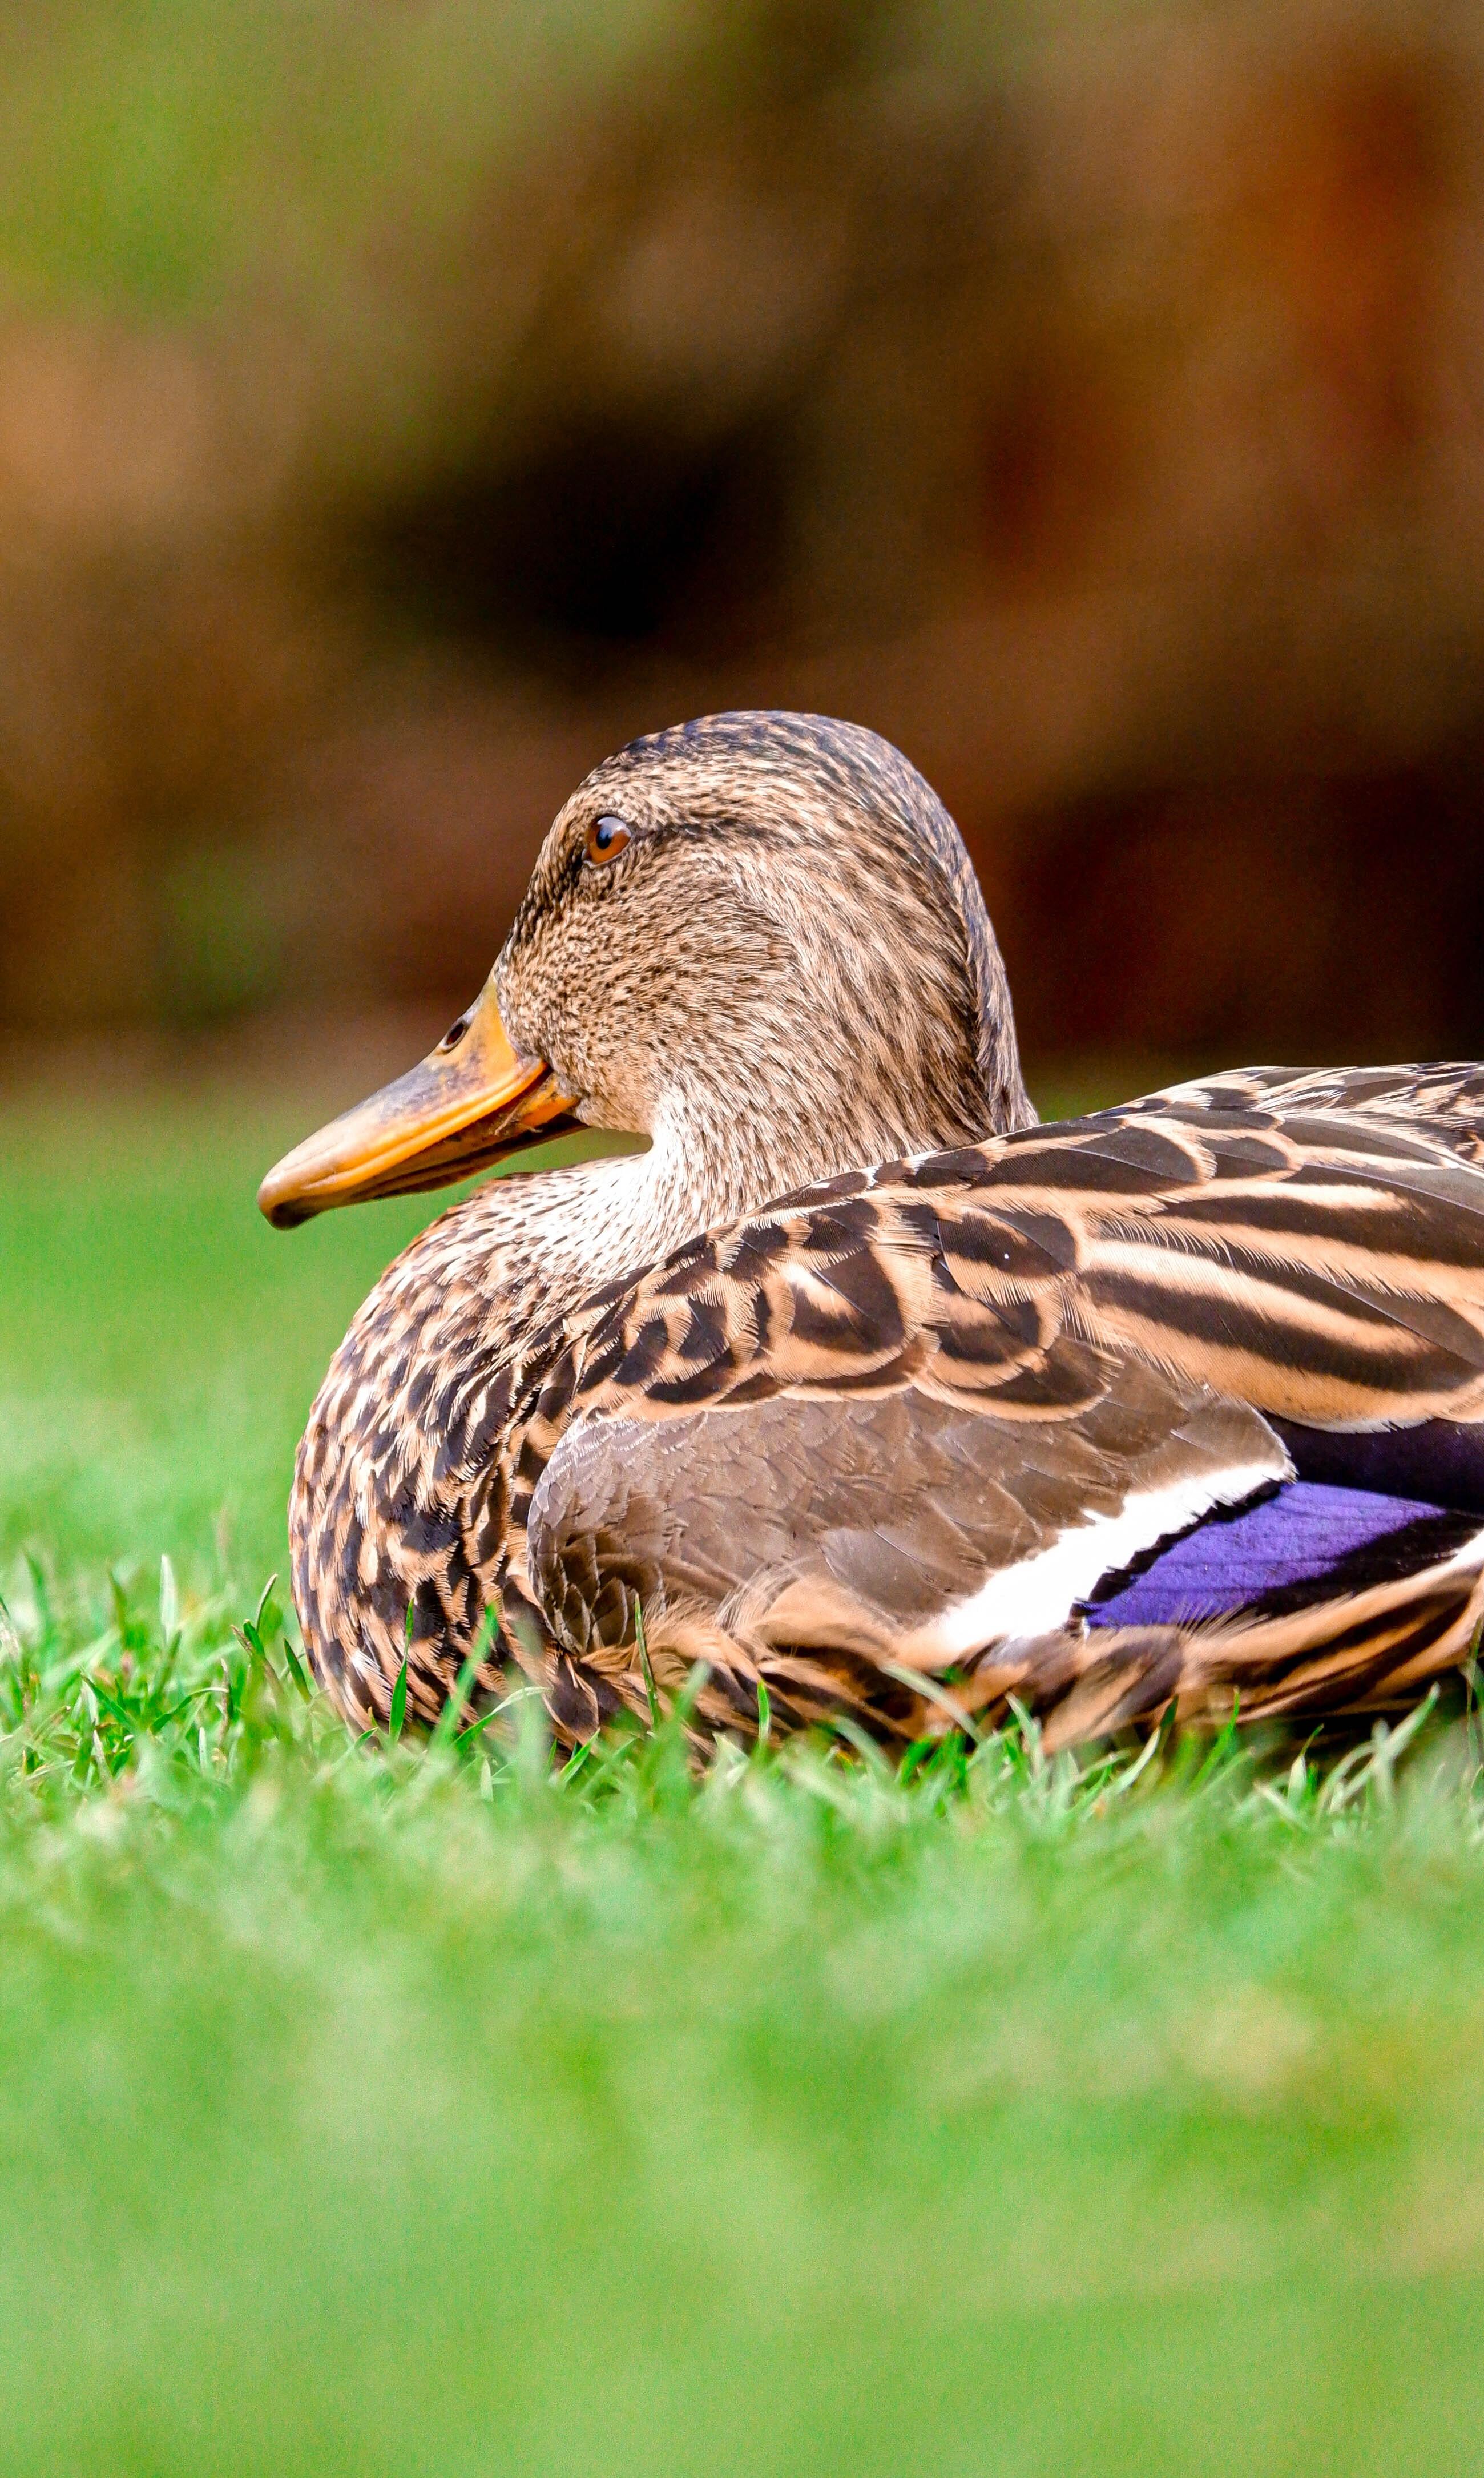  When Are Ducks Fully Feathered 